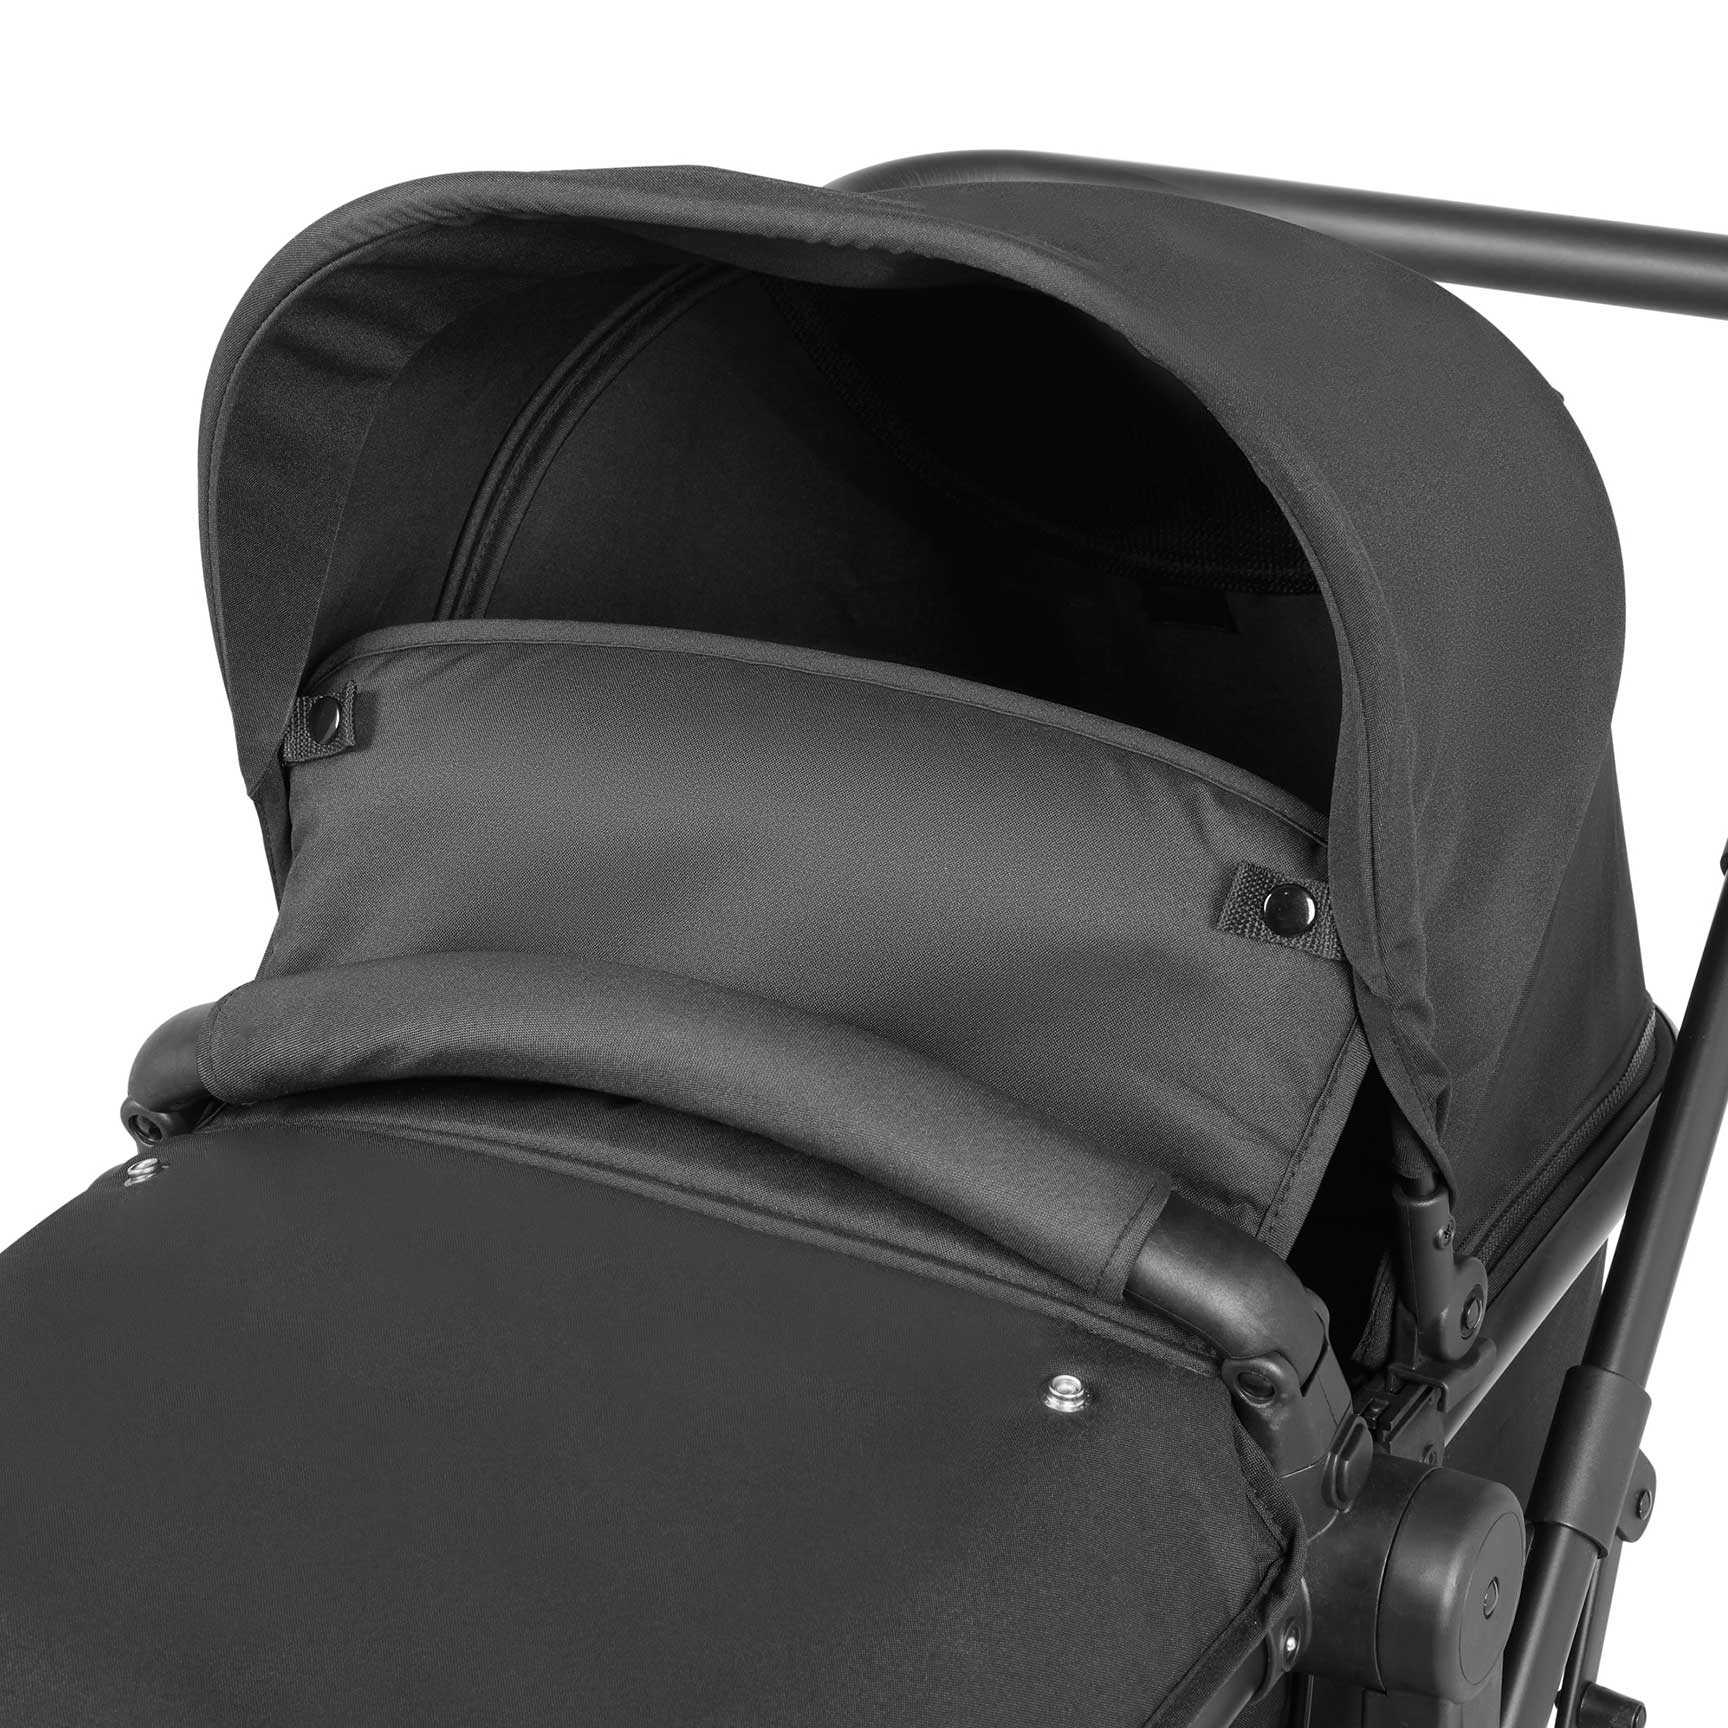 Ickle Bubba Comet All-in-One I-Size Travel System with Isofix Base in Black Baby Prams 10-008-300-002 5056515025798